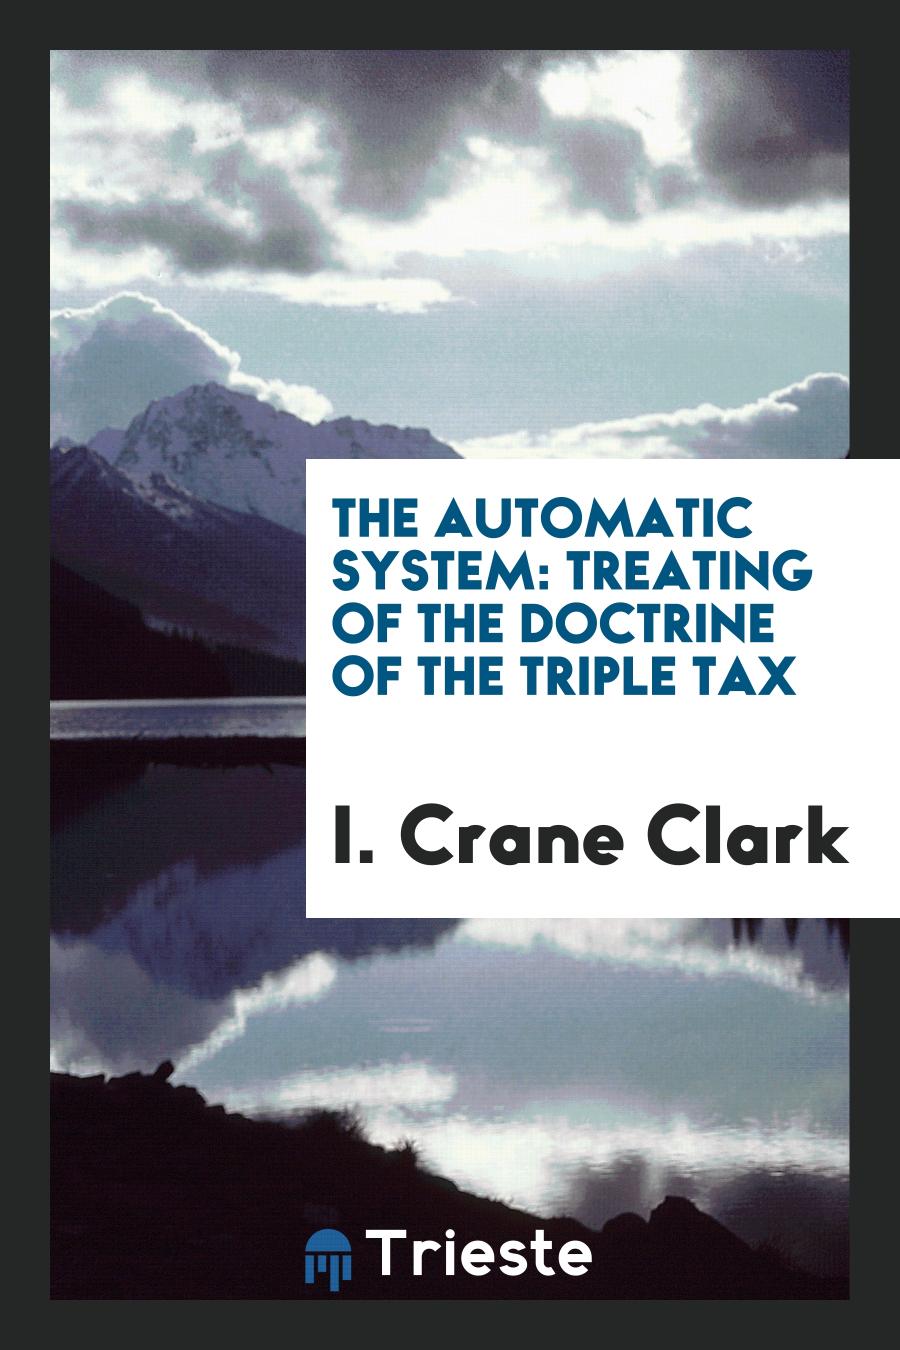 The Automatic System: Treating of the Doctrine of the Triple Tax